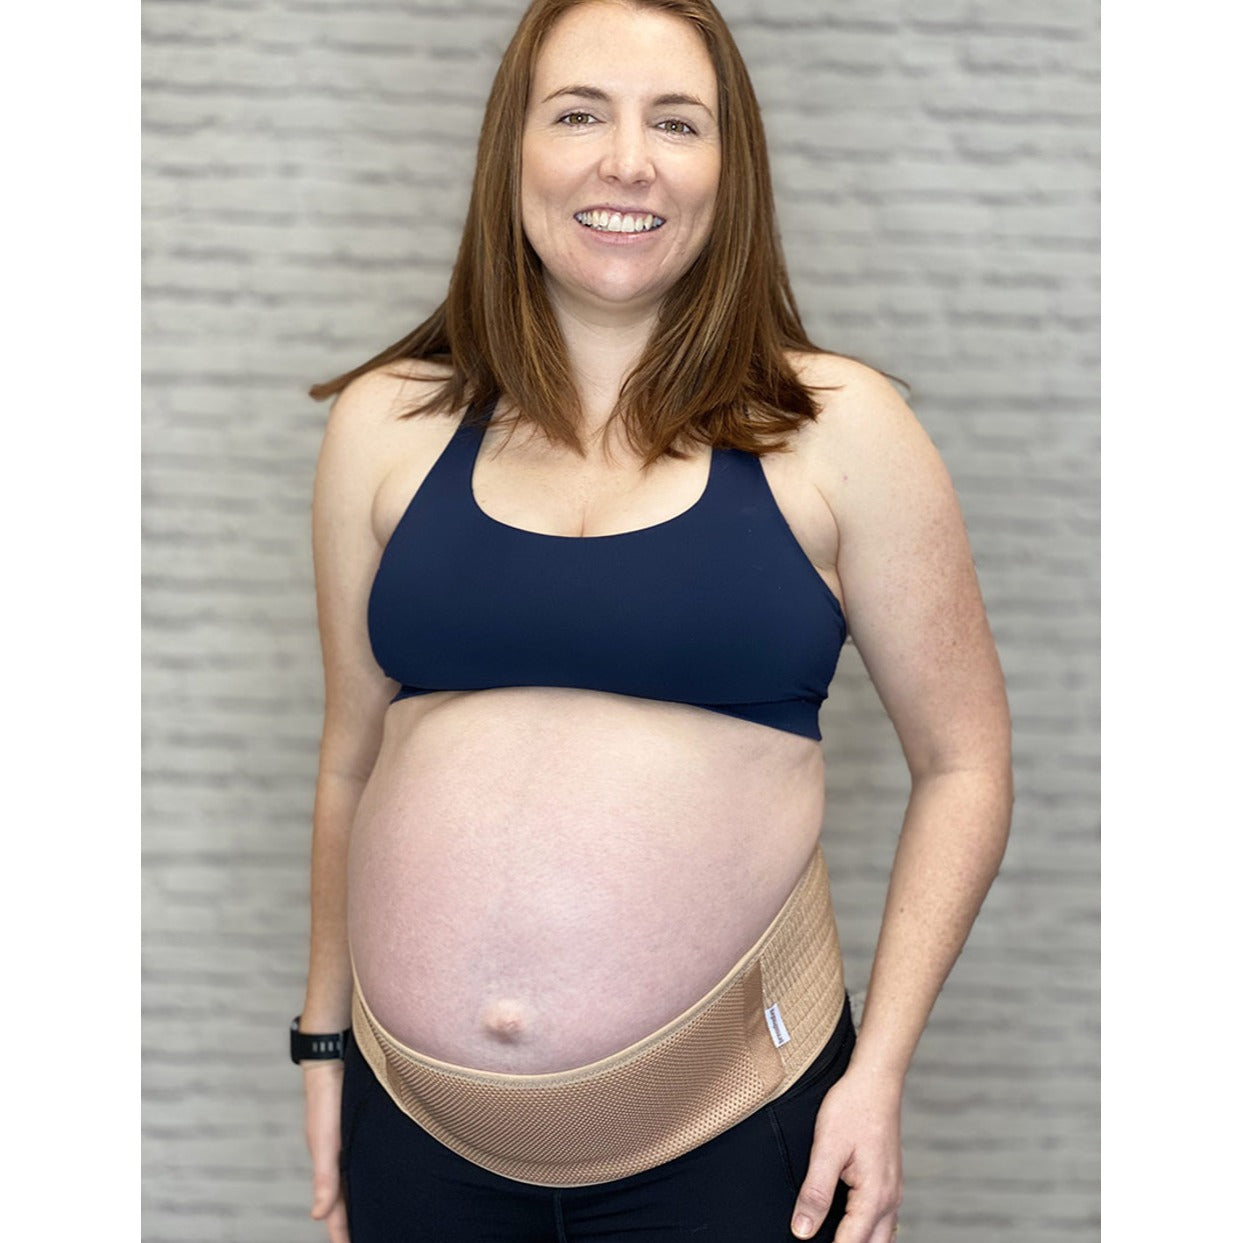 Breastmates Pregnancy Support Belt available at Bear & Moo